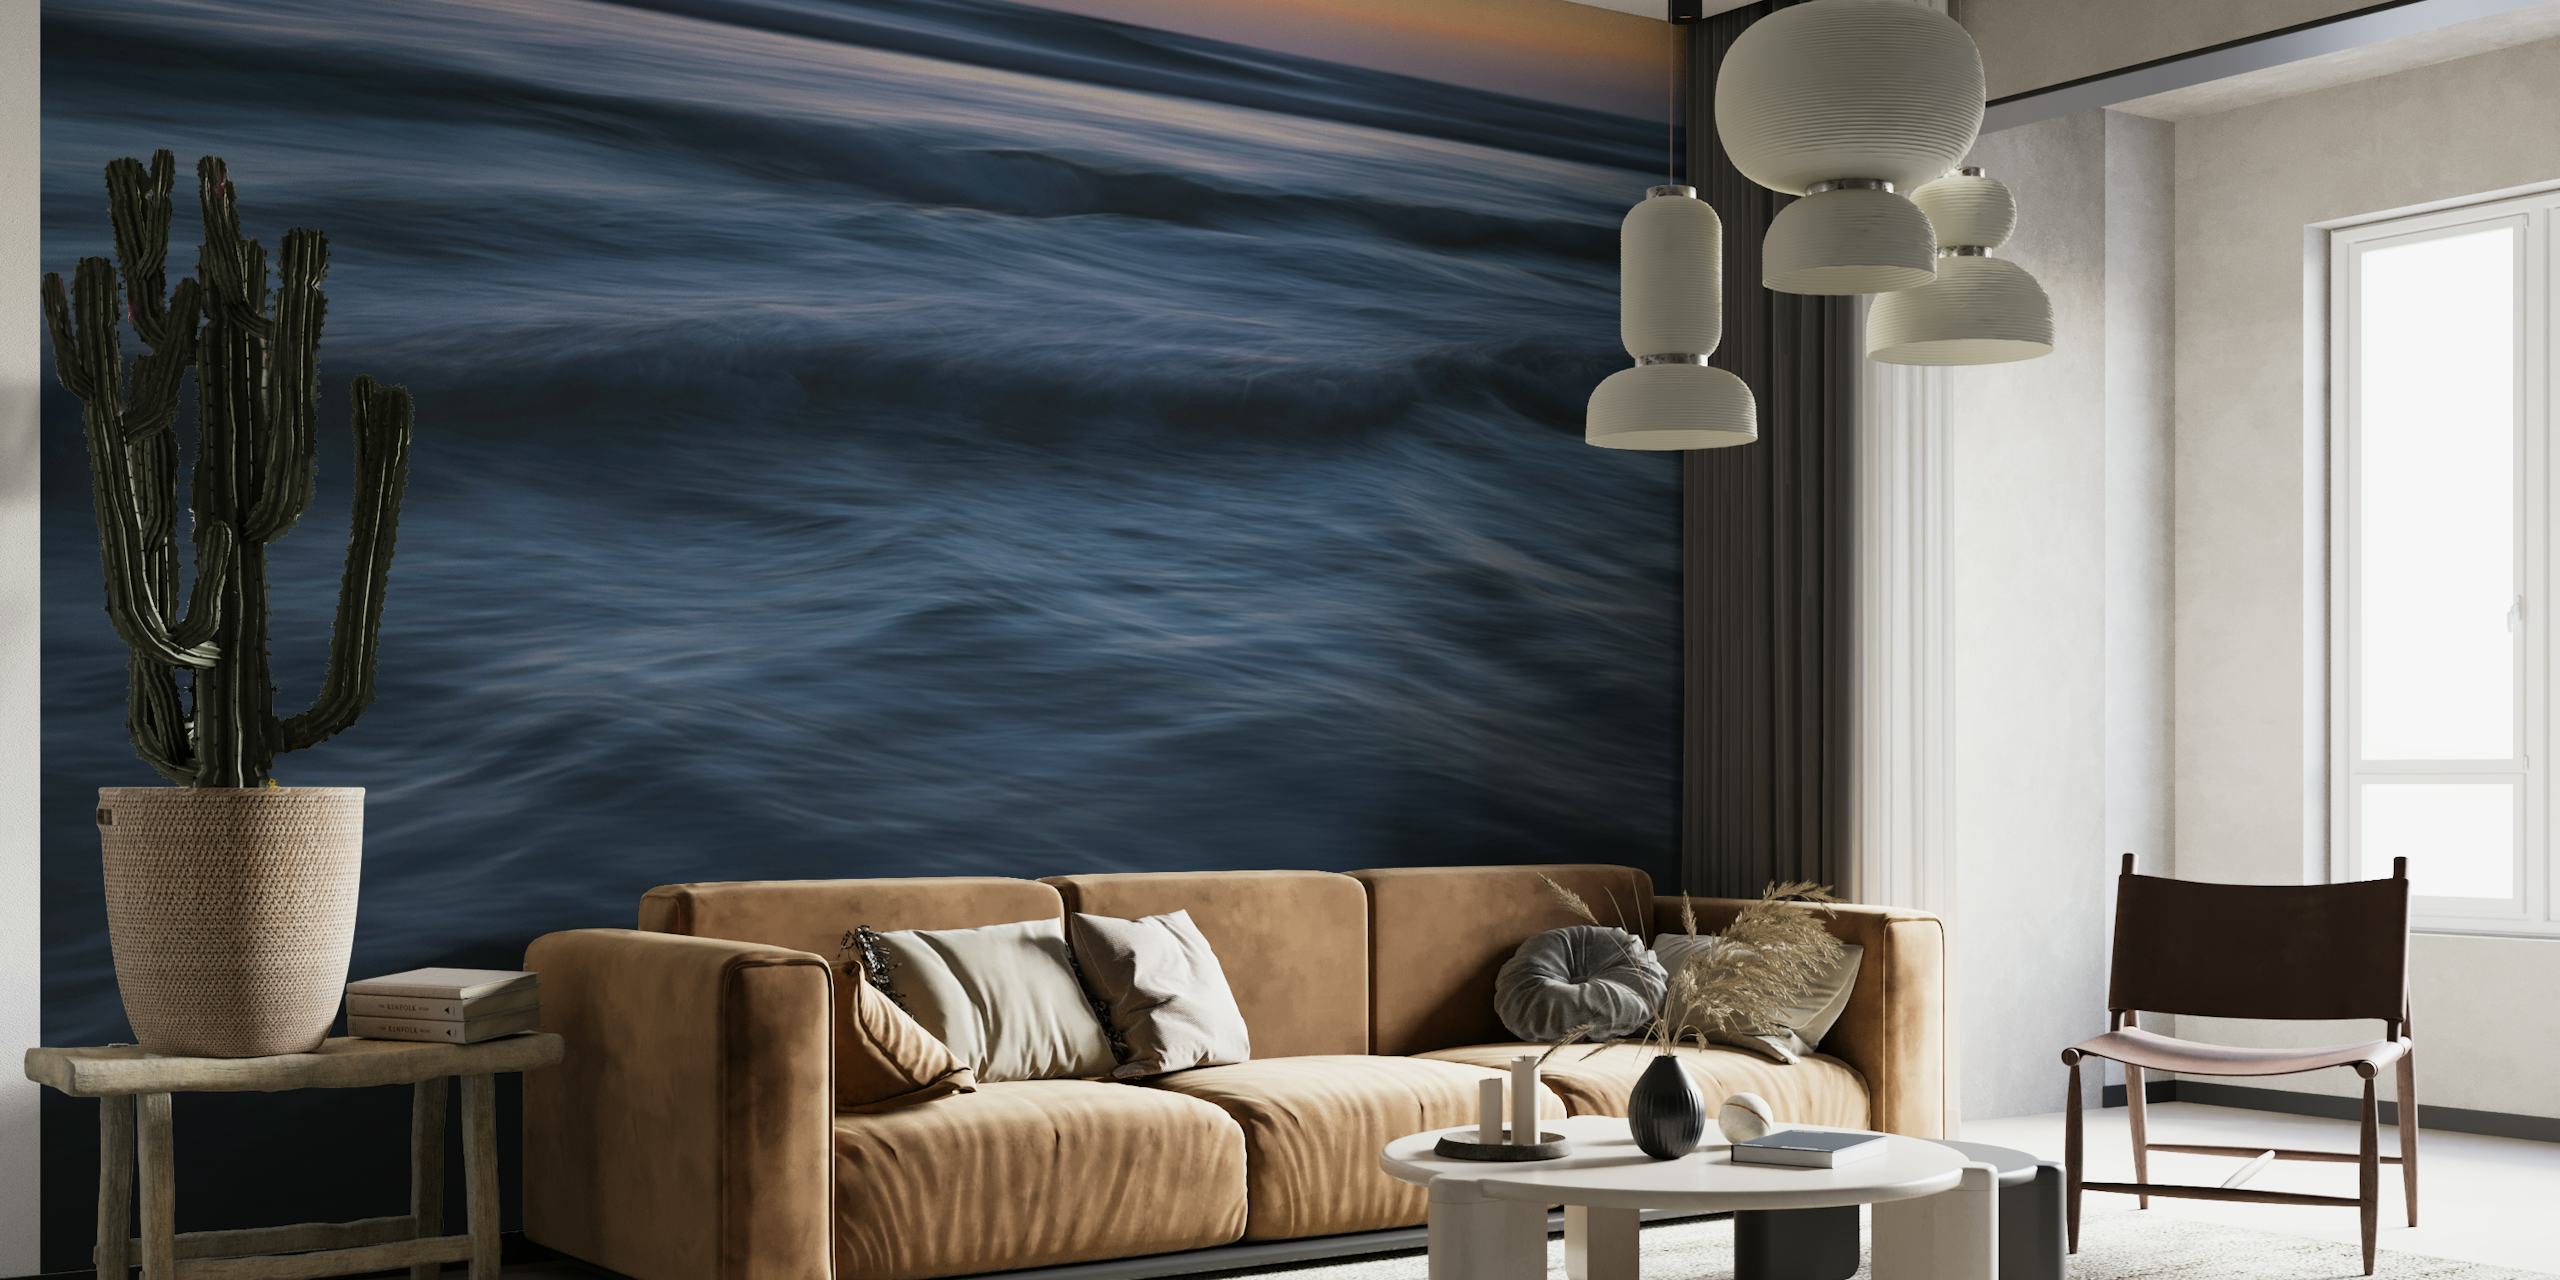 Image featuring 'The Uniqueness of Waves XXXV' wall mural design.